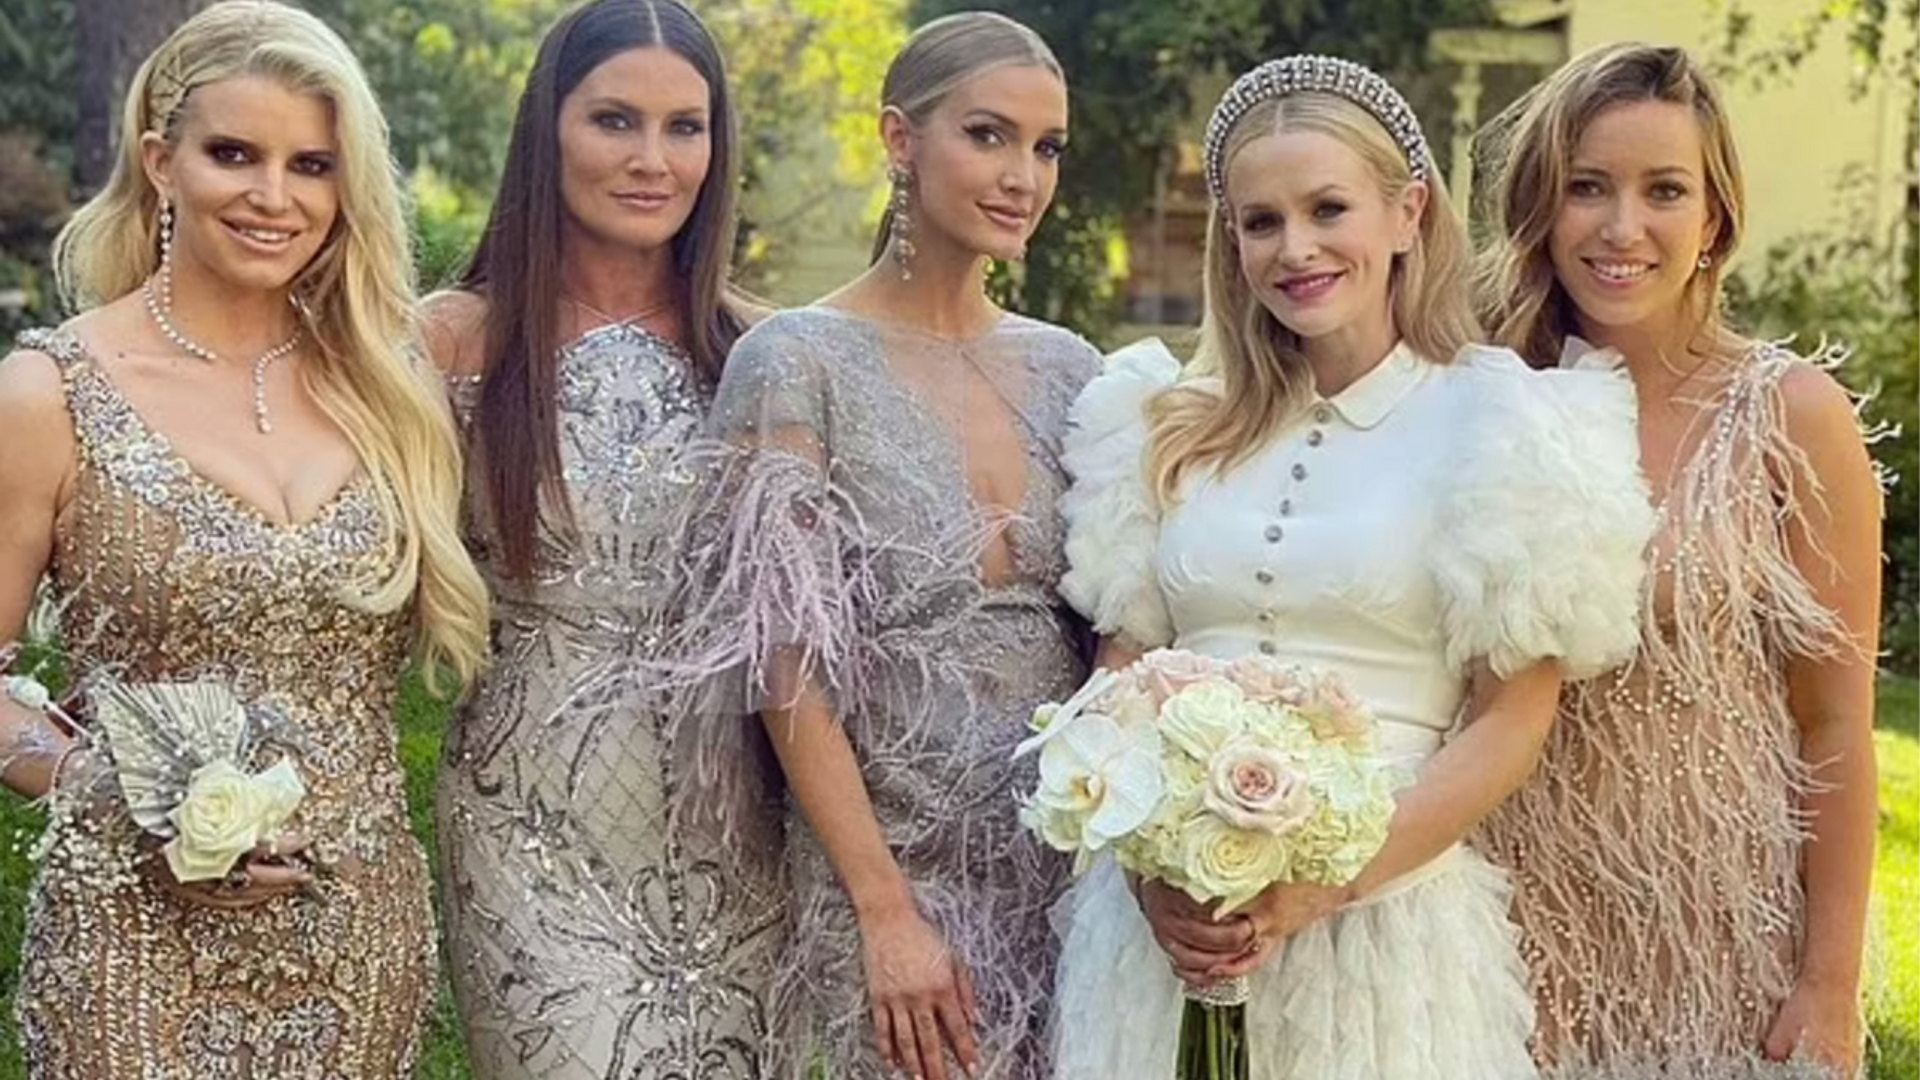 Ashlee and Jessica Simpson act as bridesmaids for friend's wedding